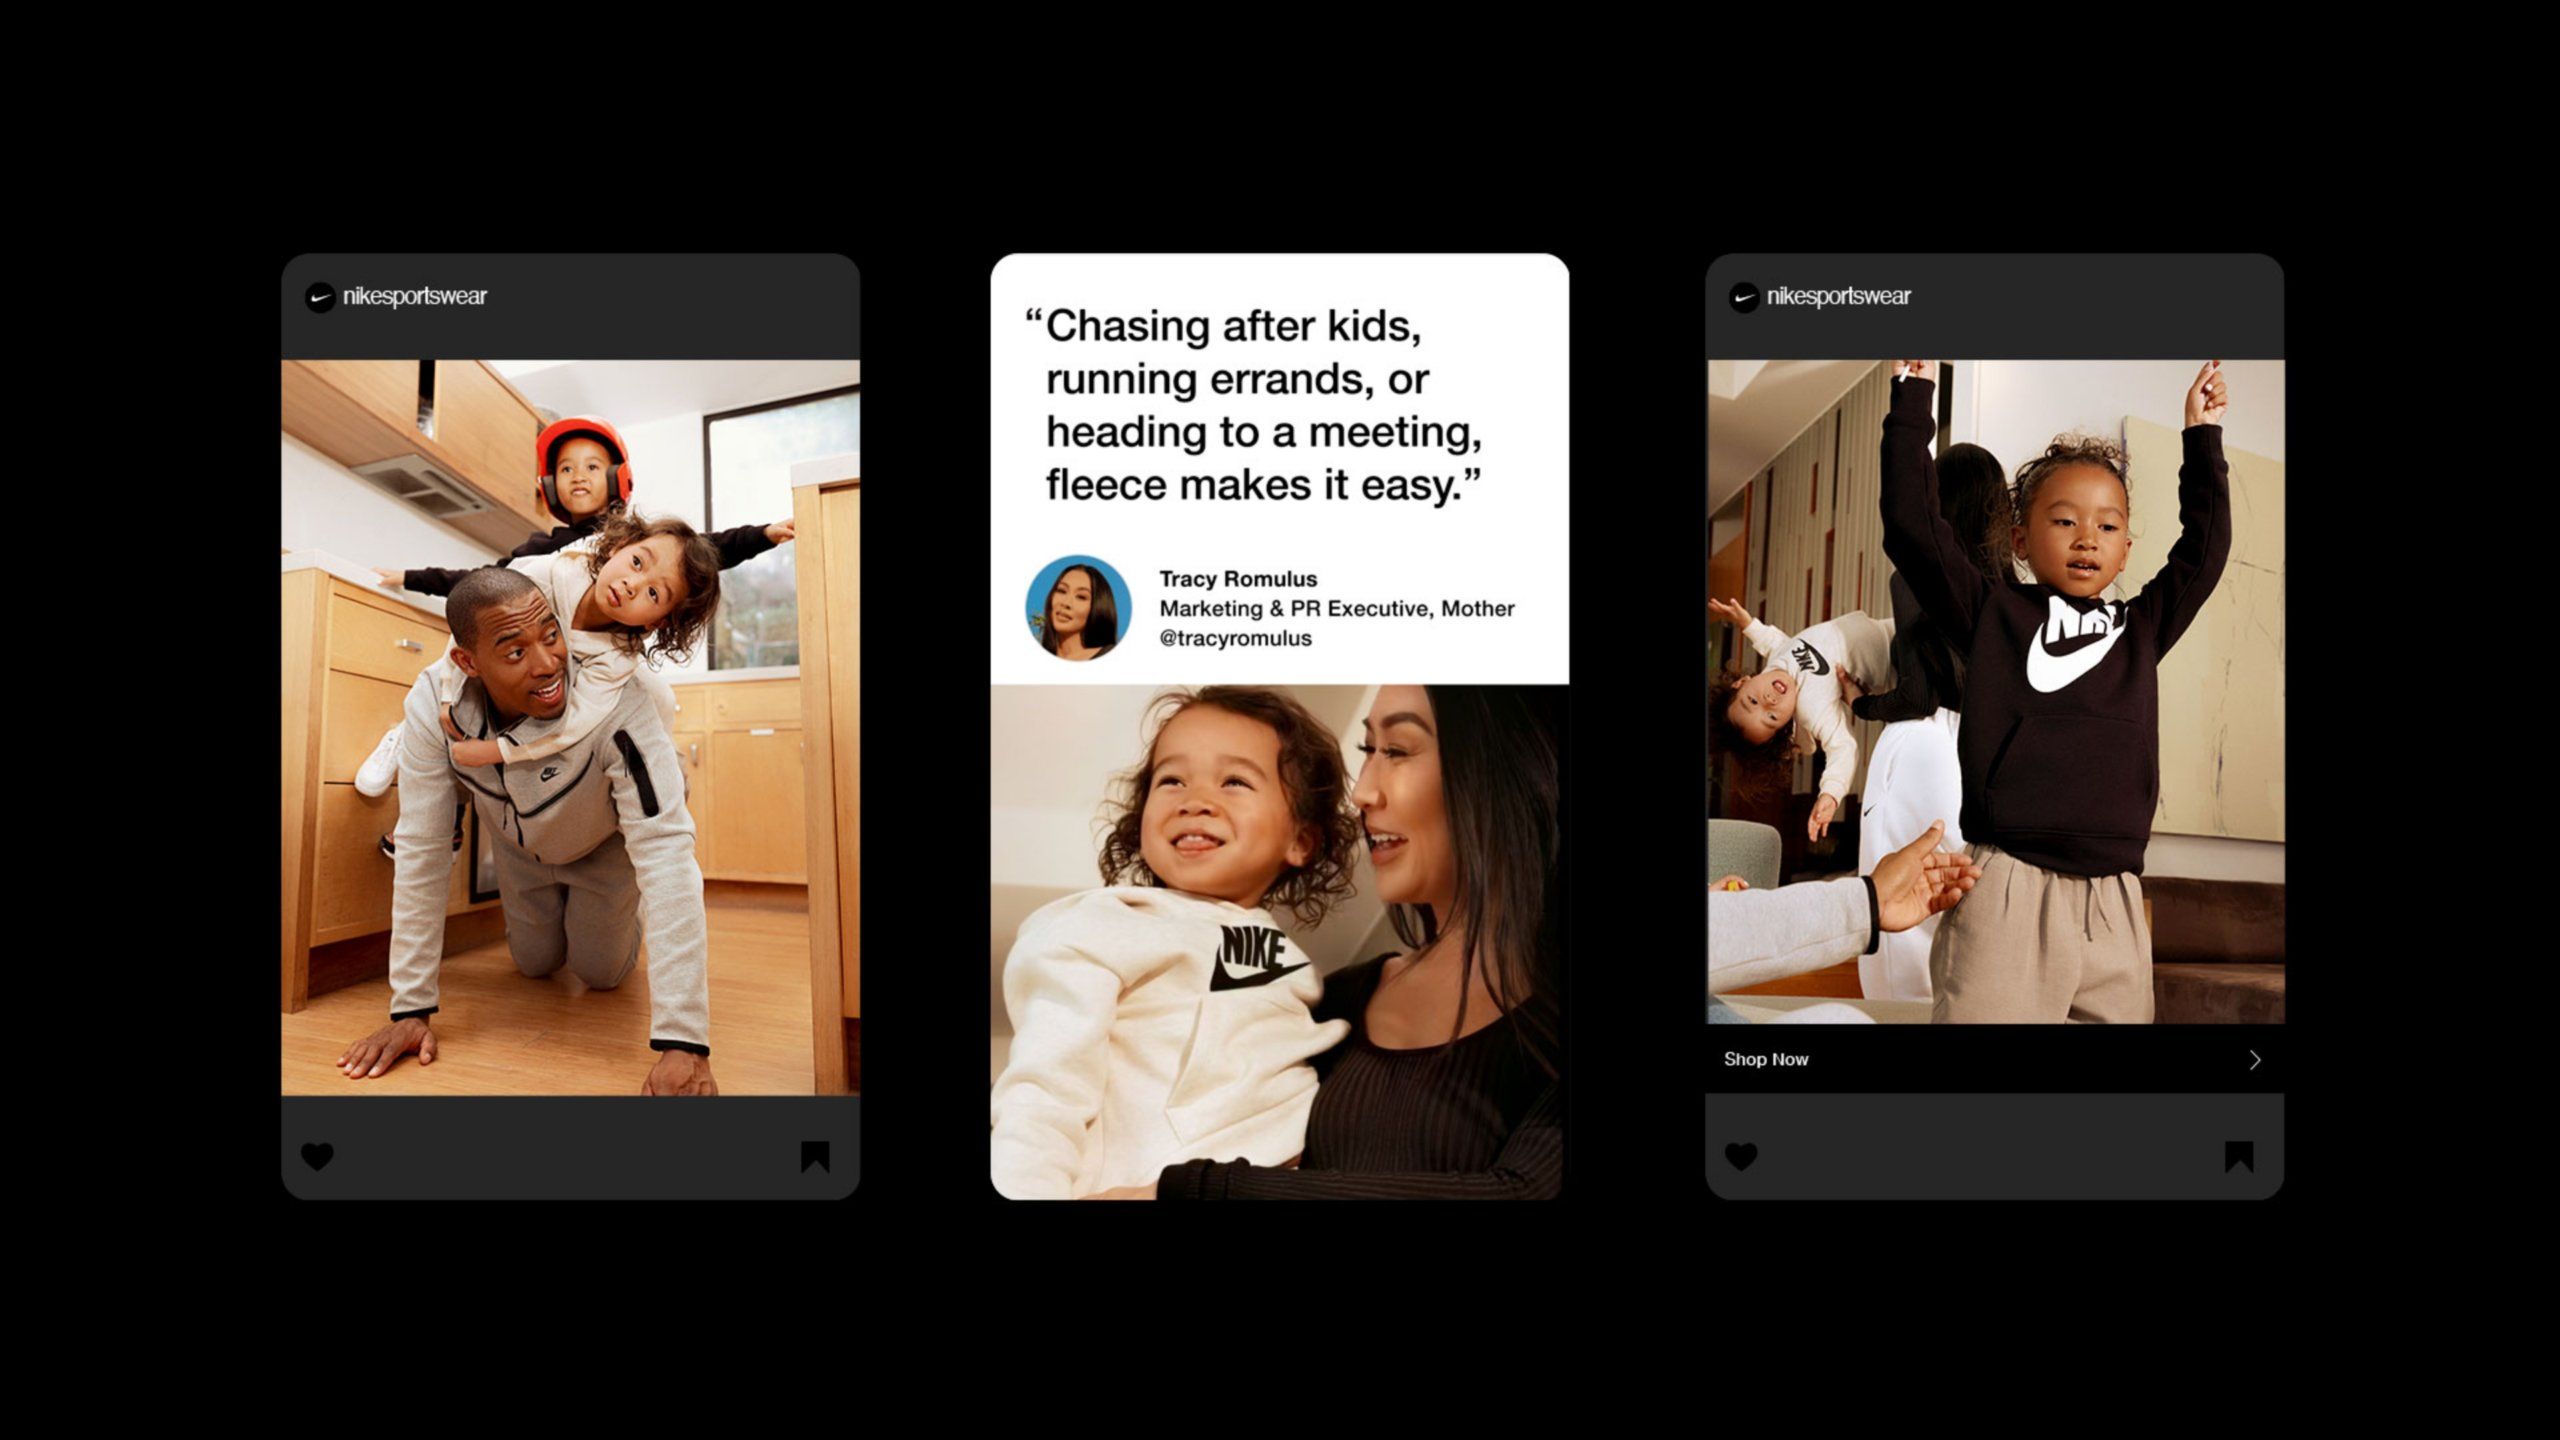 Three instagram posts by @nikesportswear featuring Tracy Romulus, Marketing & PR Executive, at home with her family. All wearing Nike Fleece clothing.